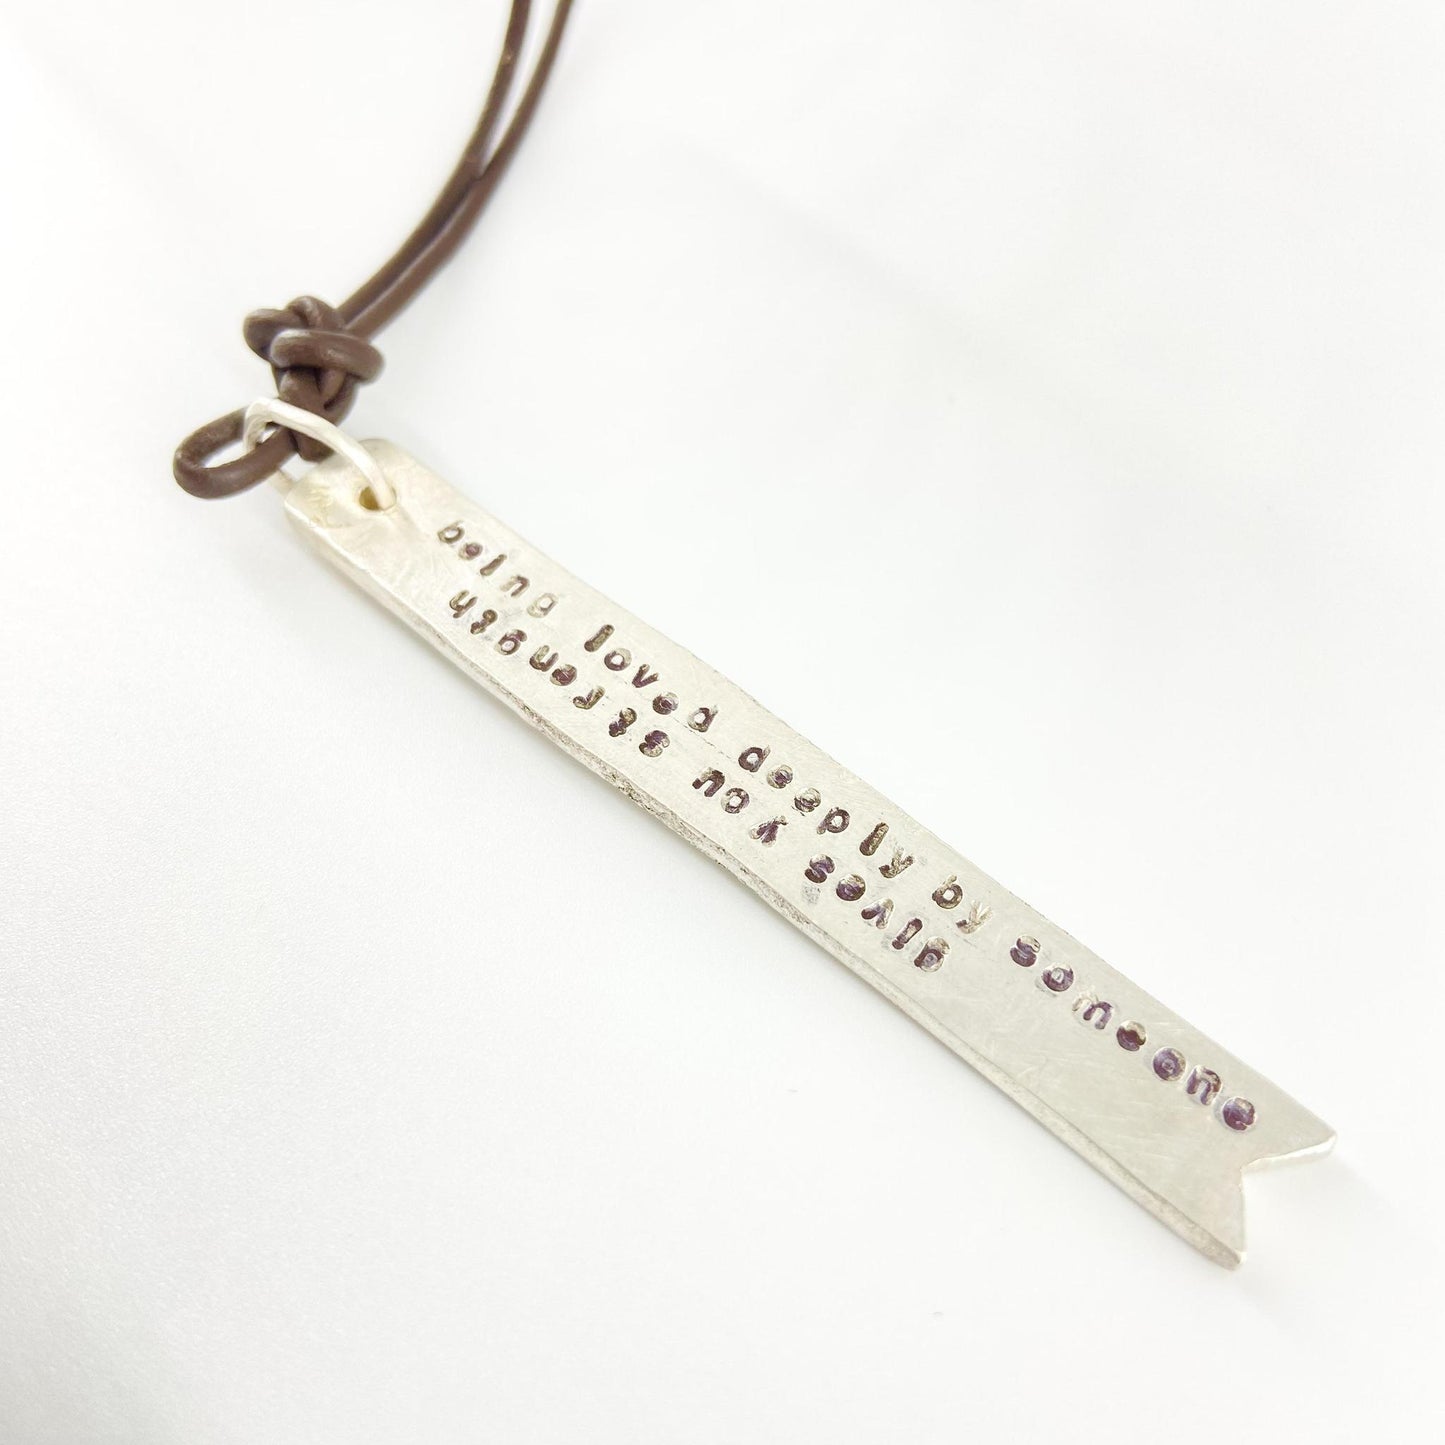 Necklace - "Being loved deeply..." - Leather/Sterling